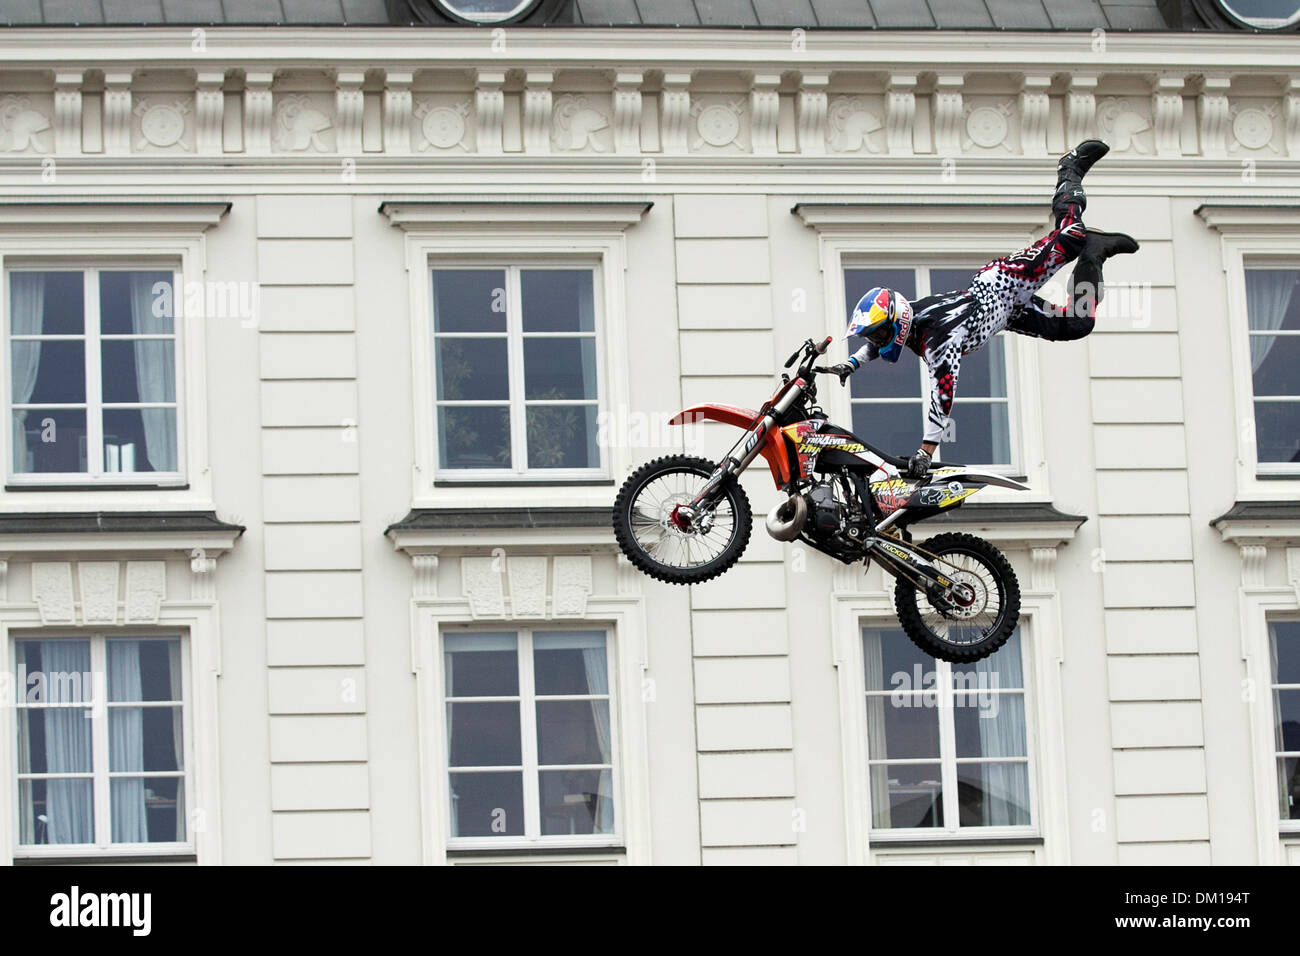 WARSAW, POLAND - June 18, 2011: Performance Red Bull X-Fighters Jams at Verva Street Racing on June 18, 2011 in Warsaw, Poland. Stock Photo